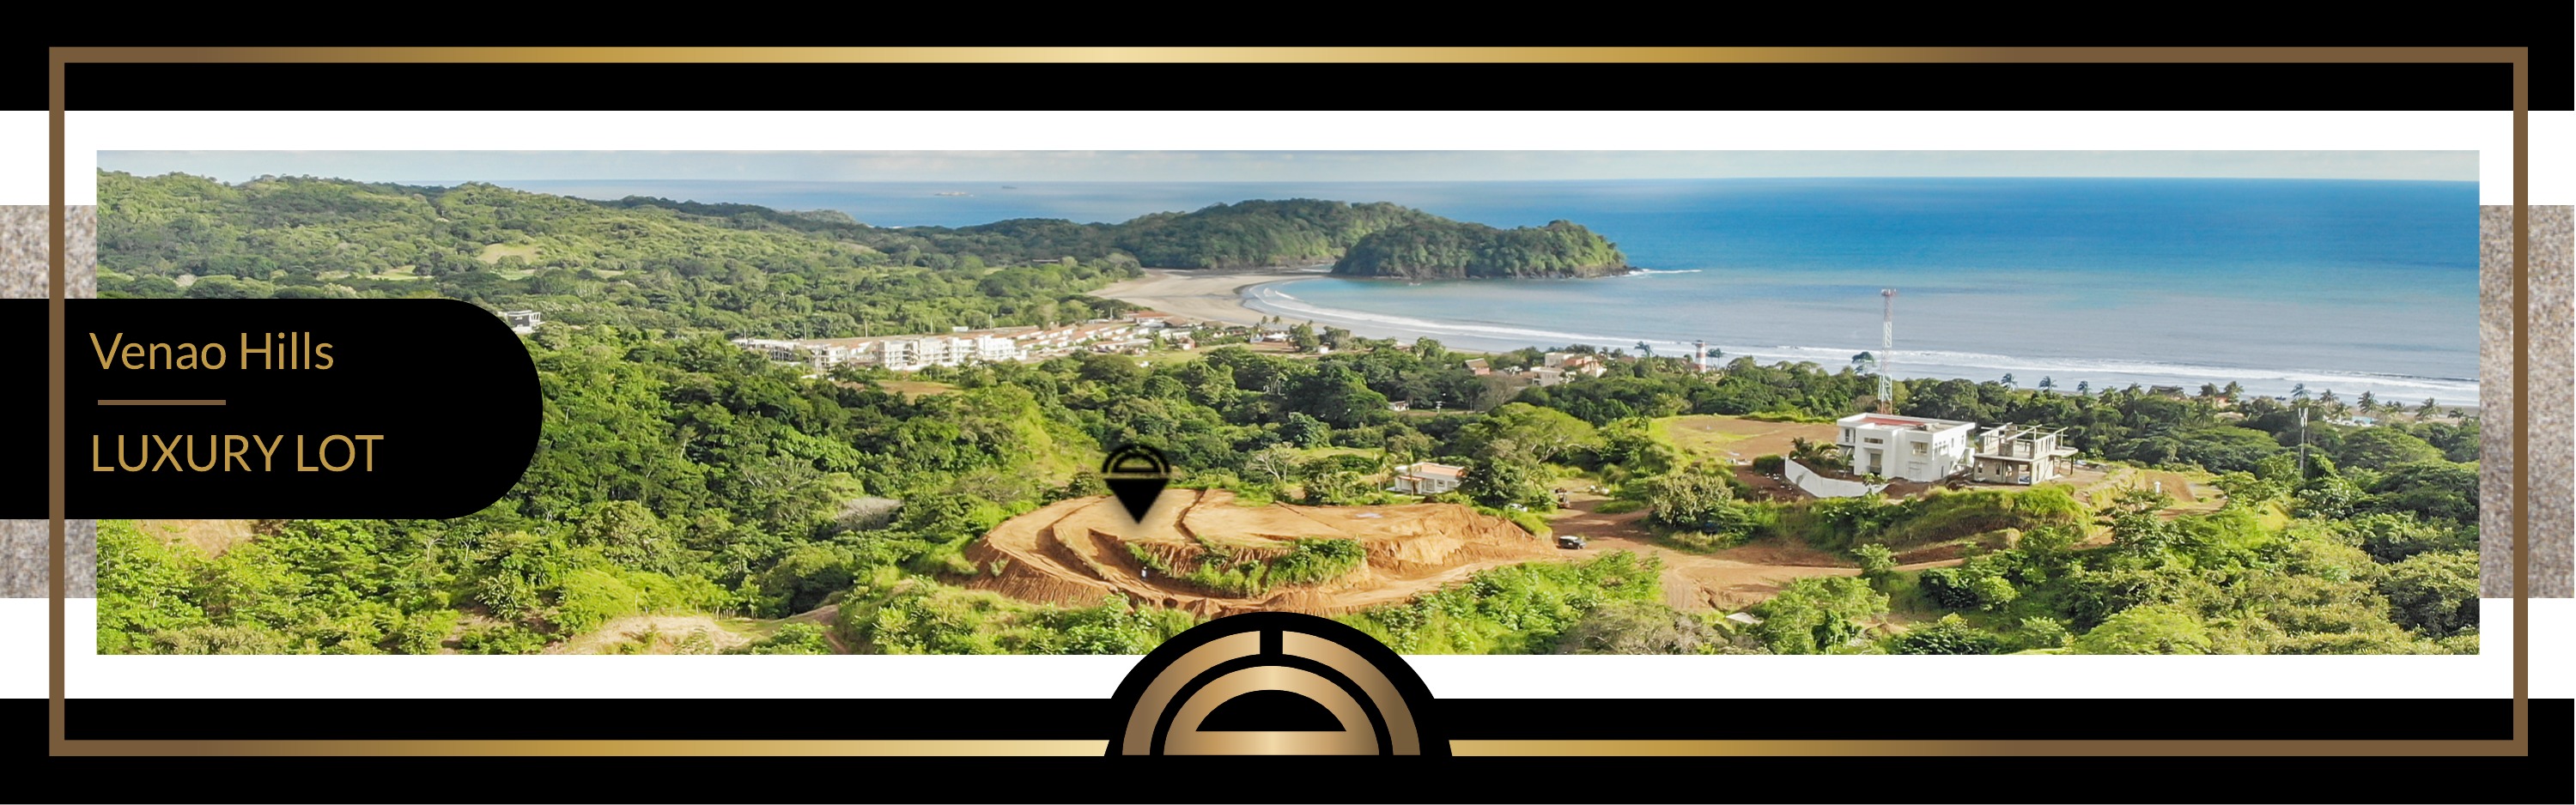 Playa Venao Hills Luxury Home Lot For Sale